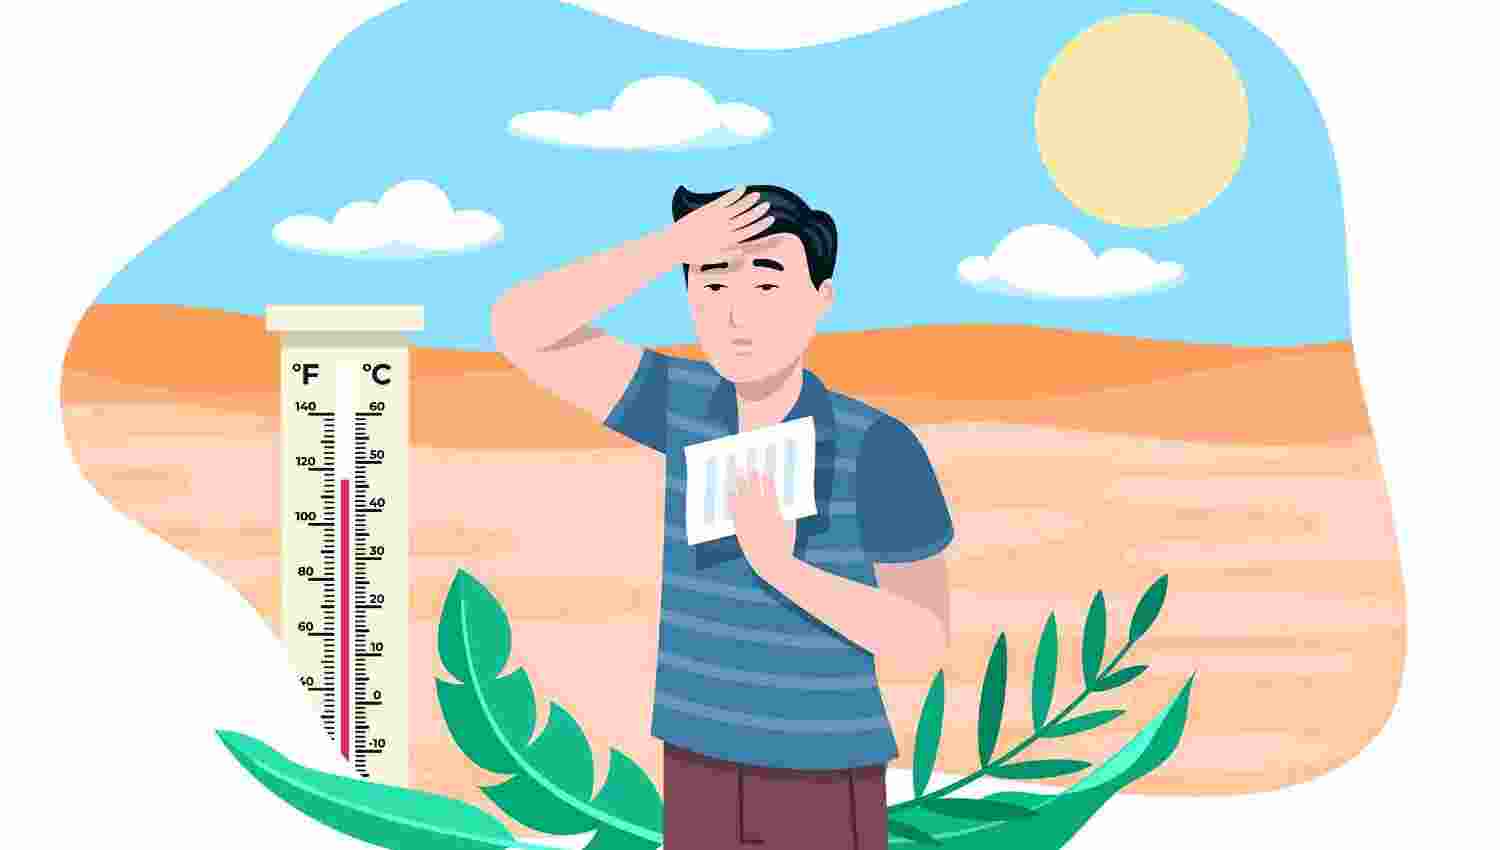 How to cool down quickly and safely in a heatwave